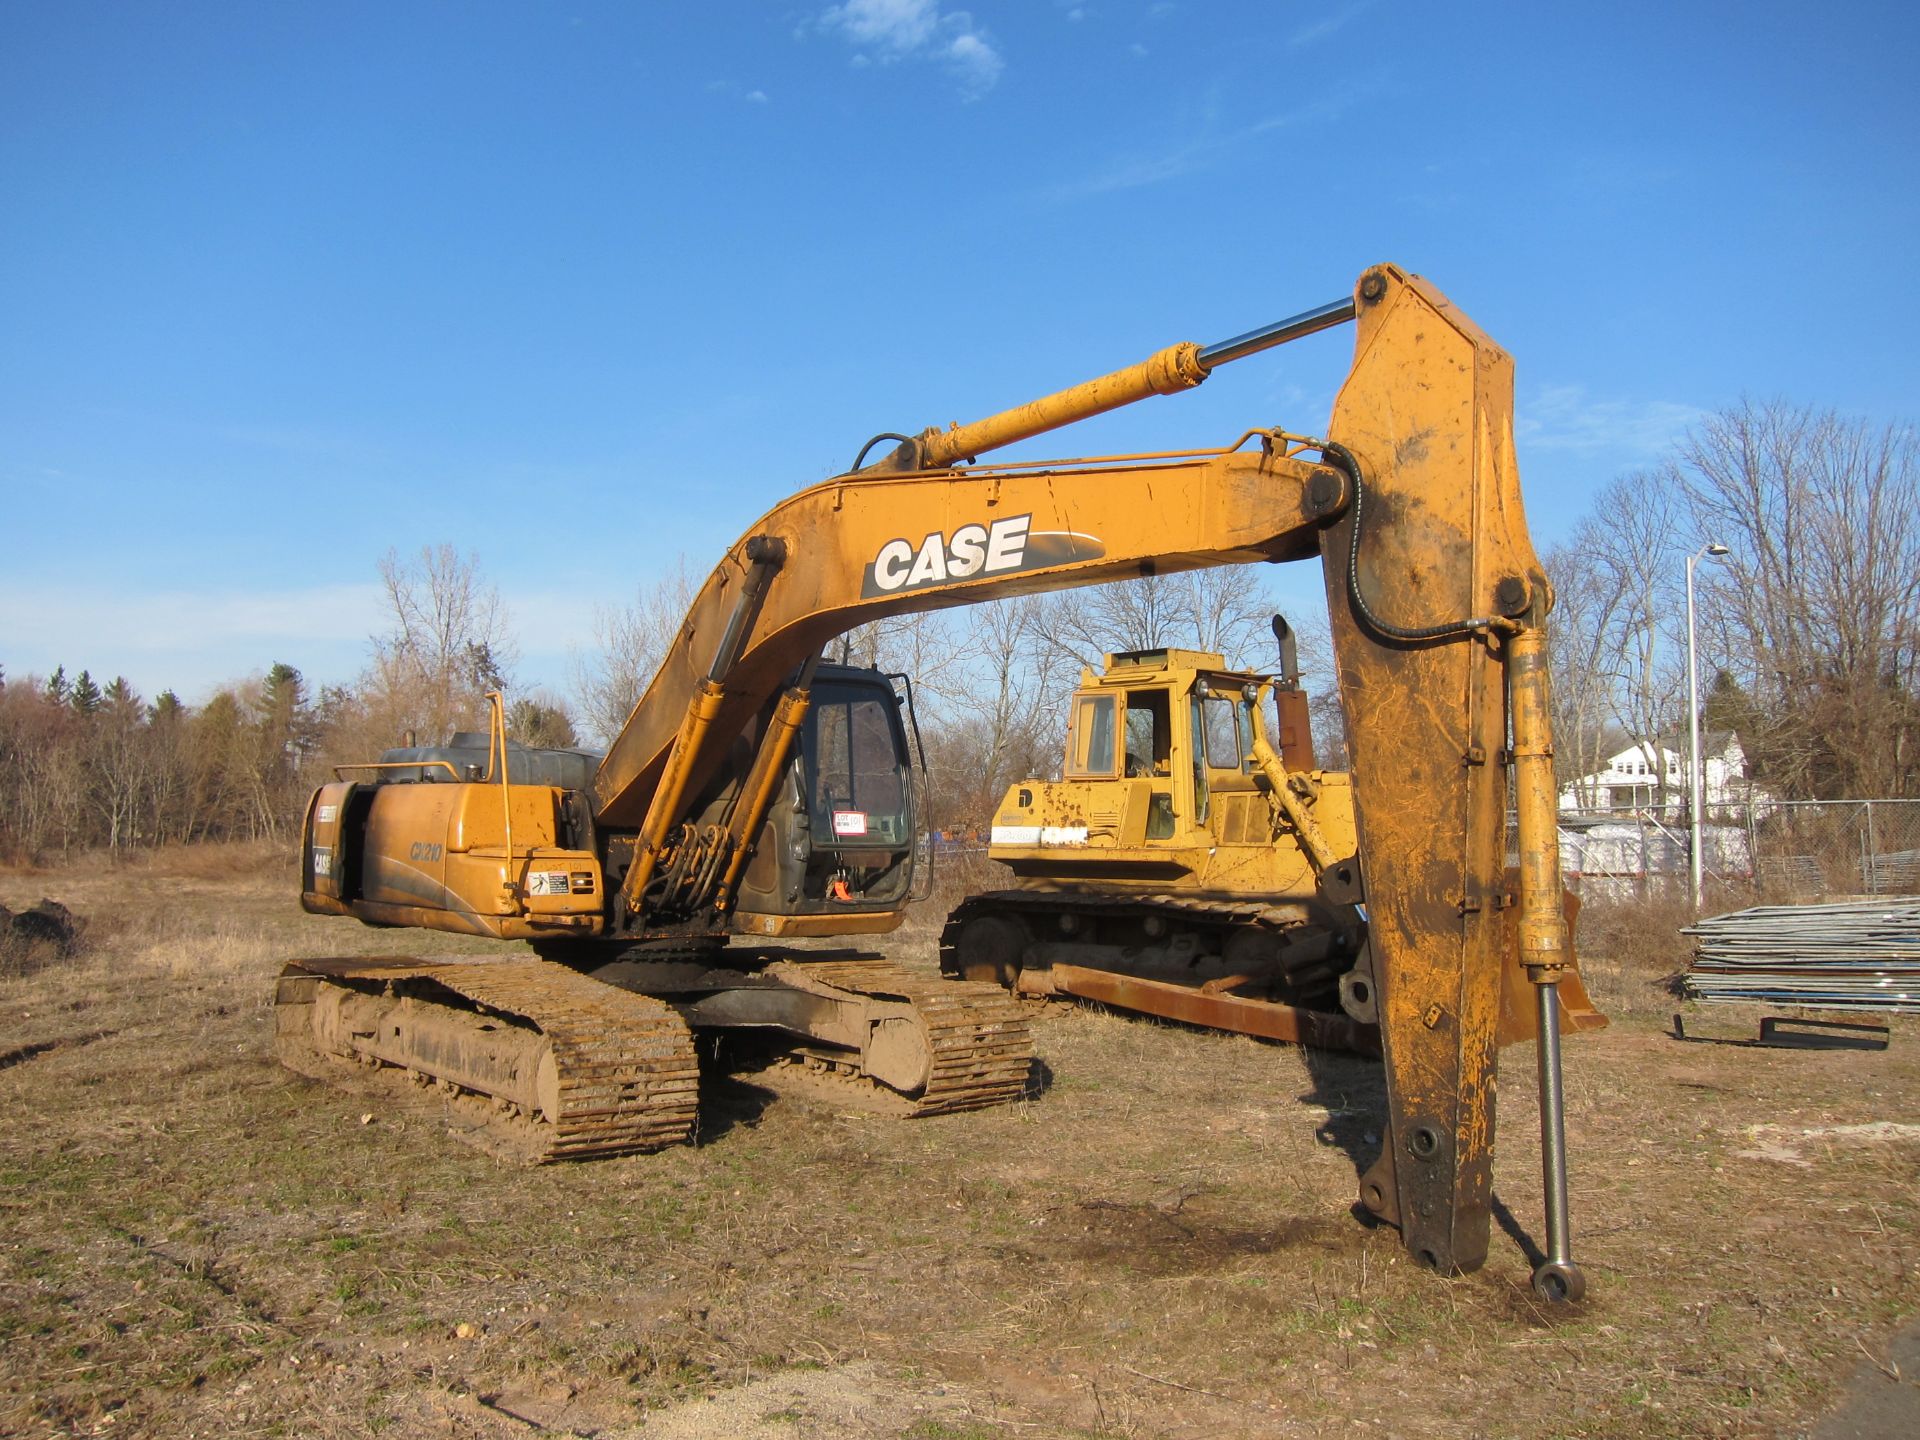 2004 Case Crawler Excavator mdl CX-210 EROPS with AC cab, third valve plumbed to stick for grapple - Image 2 of 4